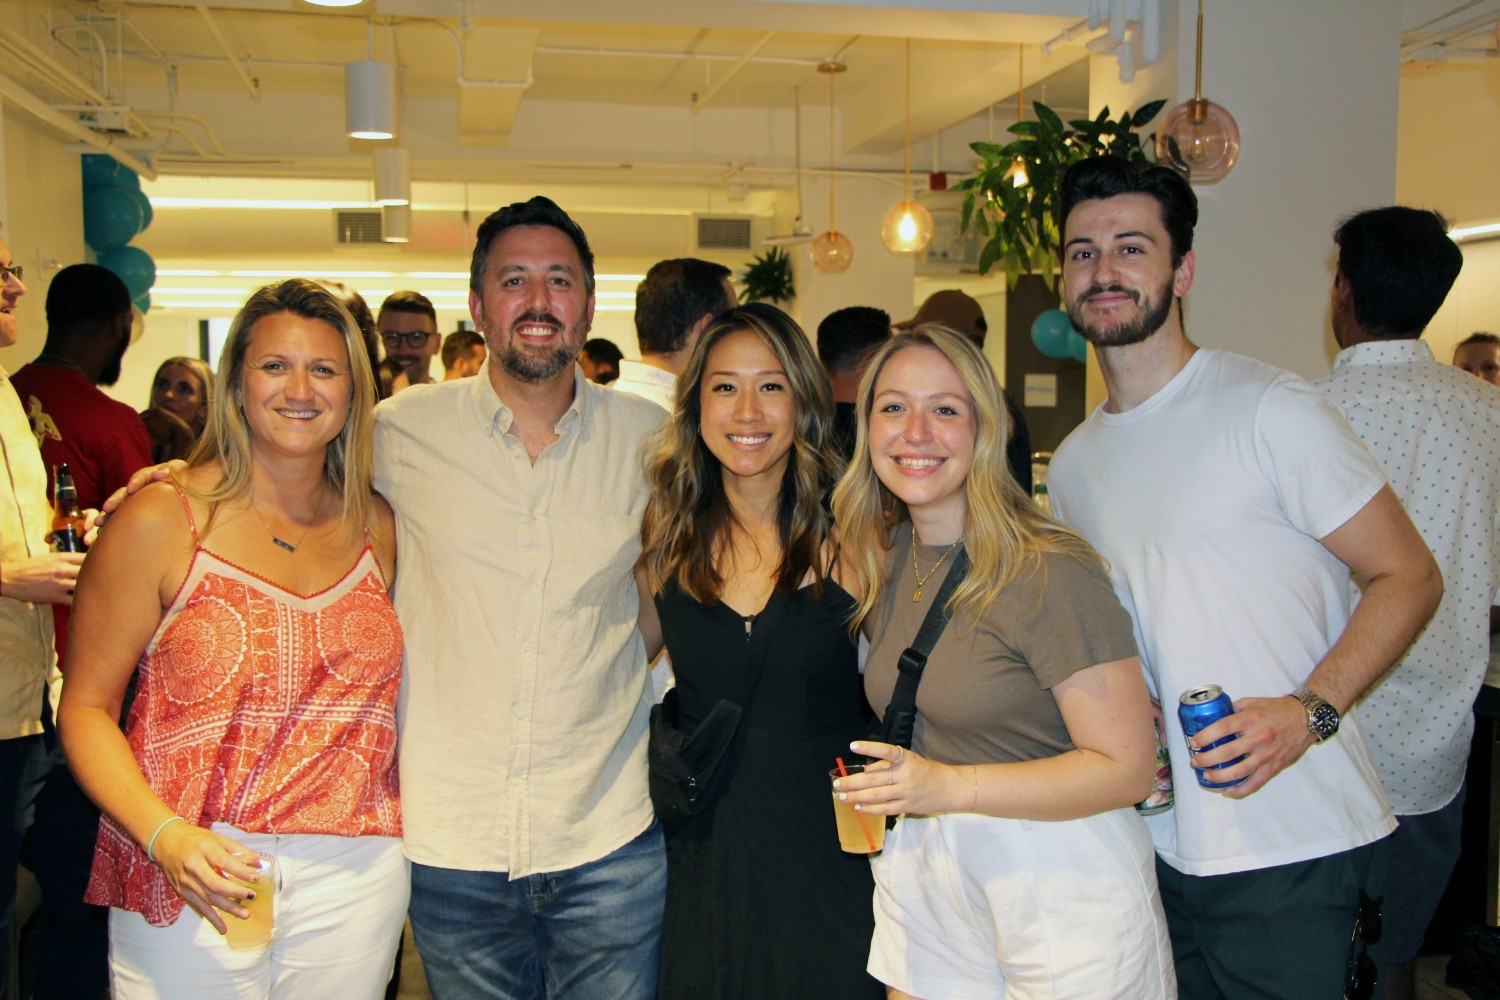 Roomies get together for a photo during our new office welcome party at our SevenRooms Headquarters in New York, NY.